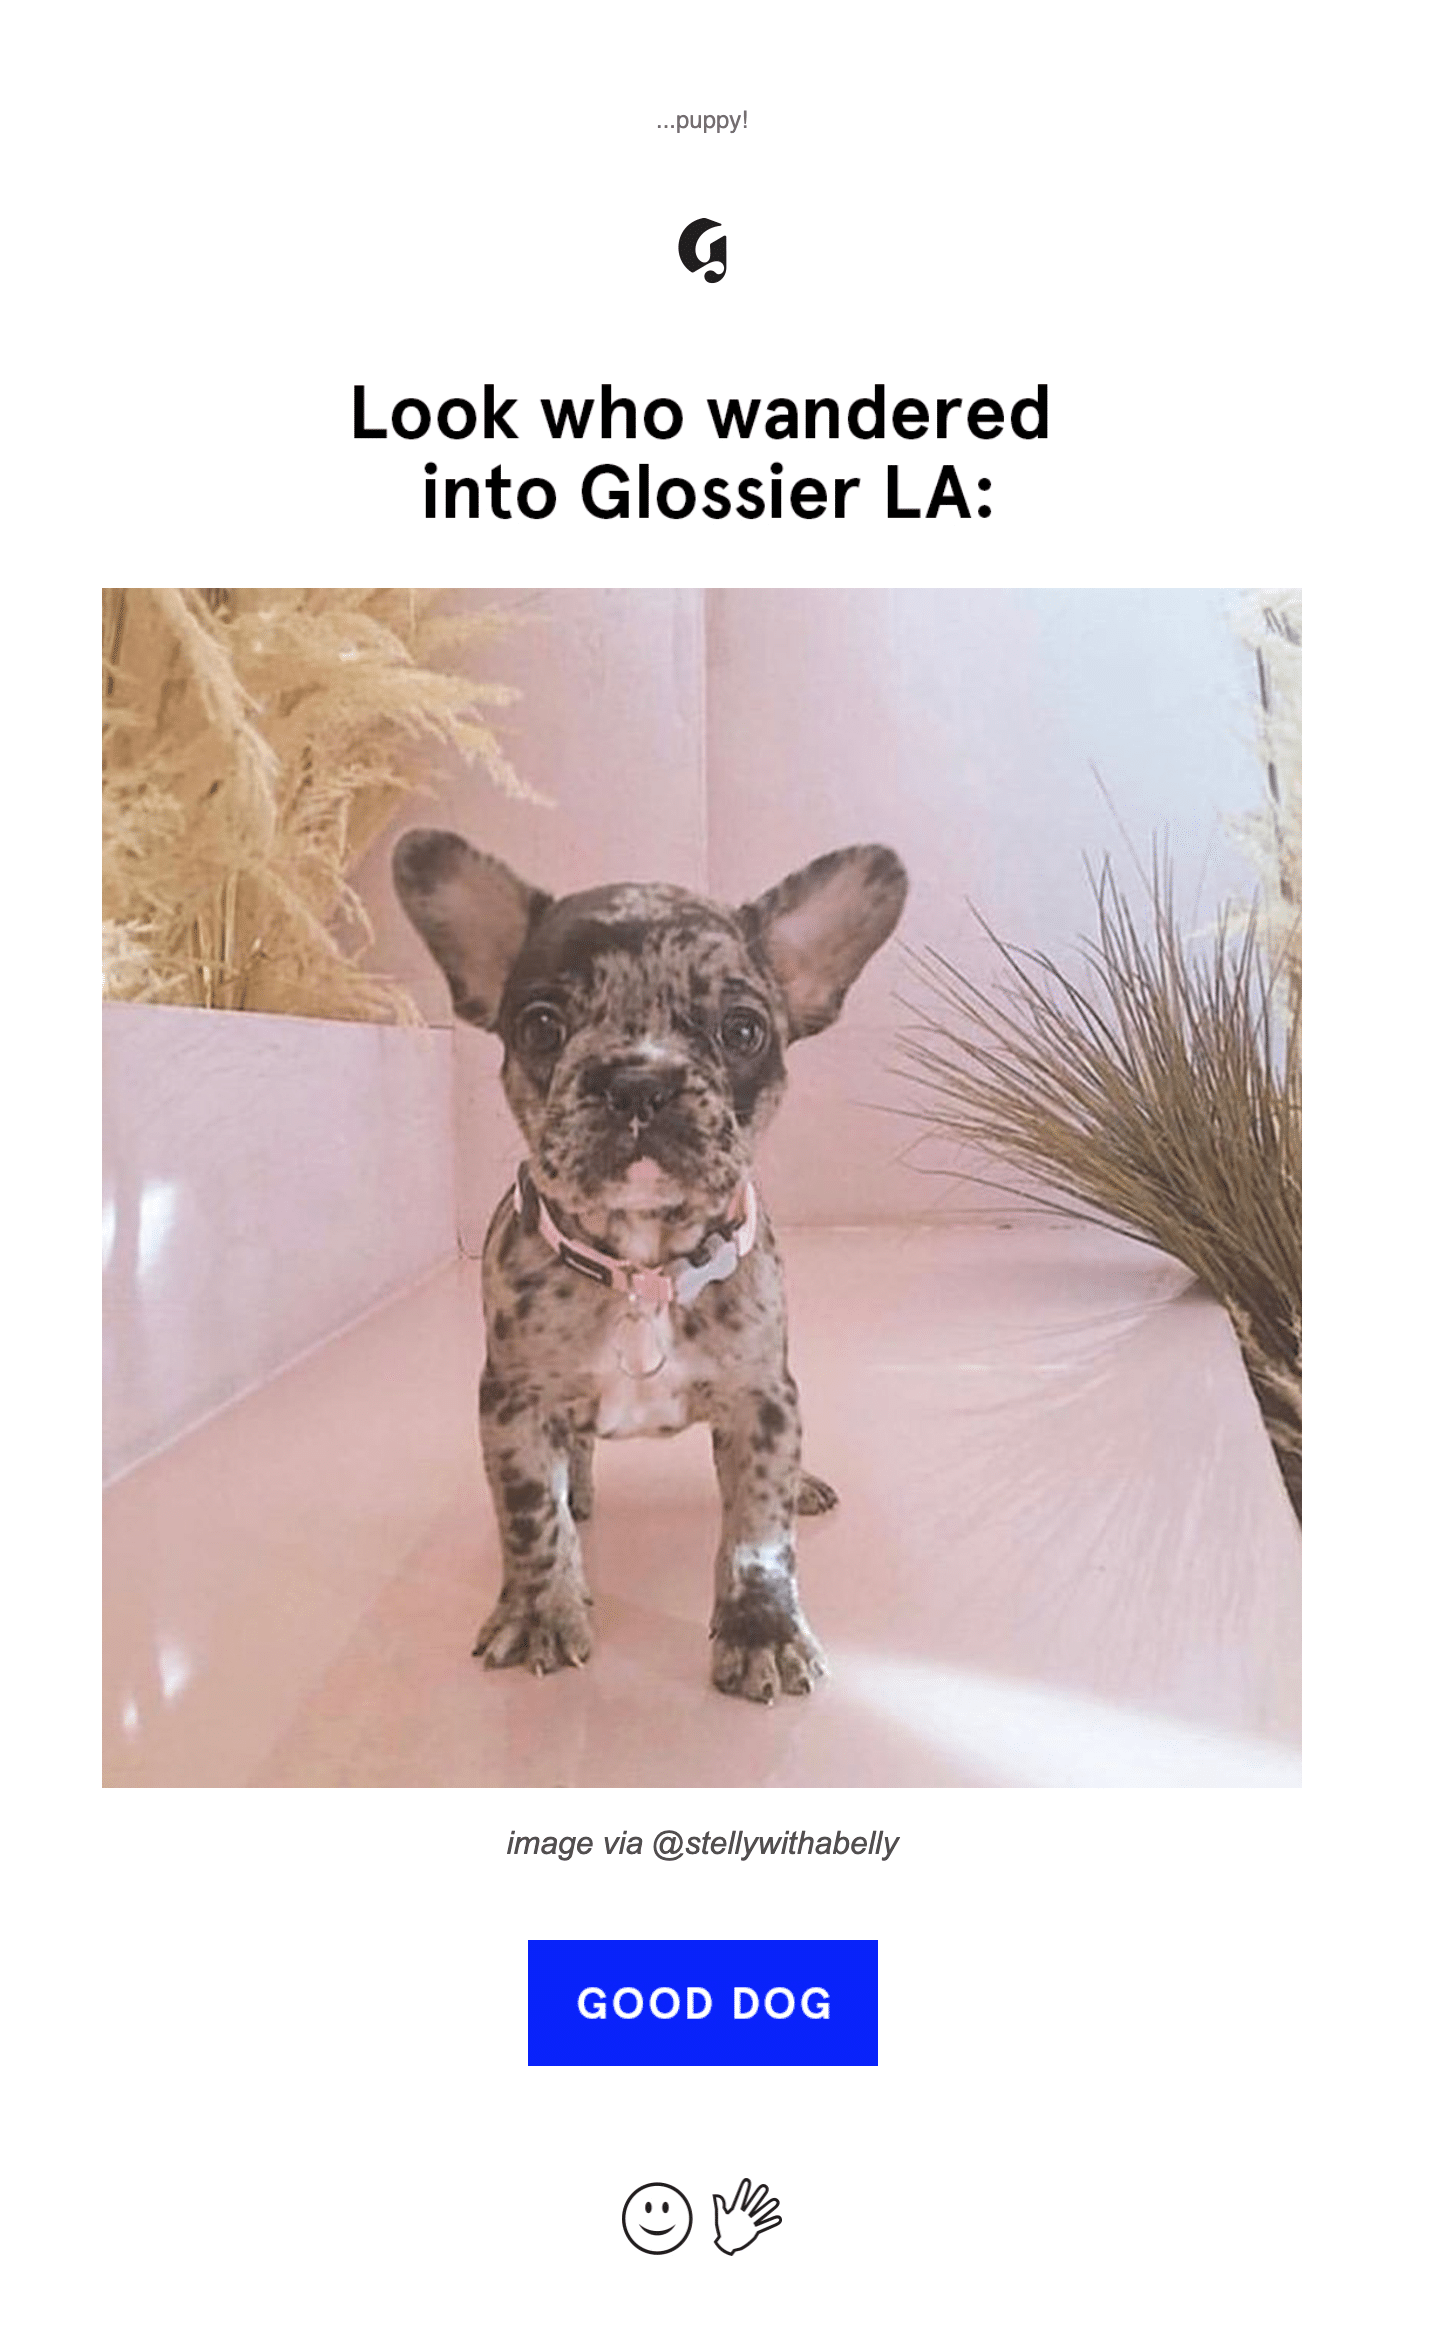 This email from Glossier was a great surprise for this subscriber! The cute pup was a treat in an otherwise work-obsessed inbox.